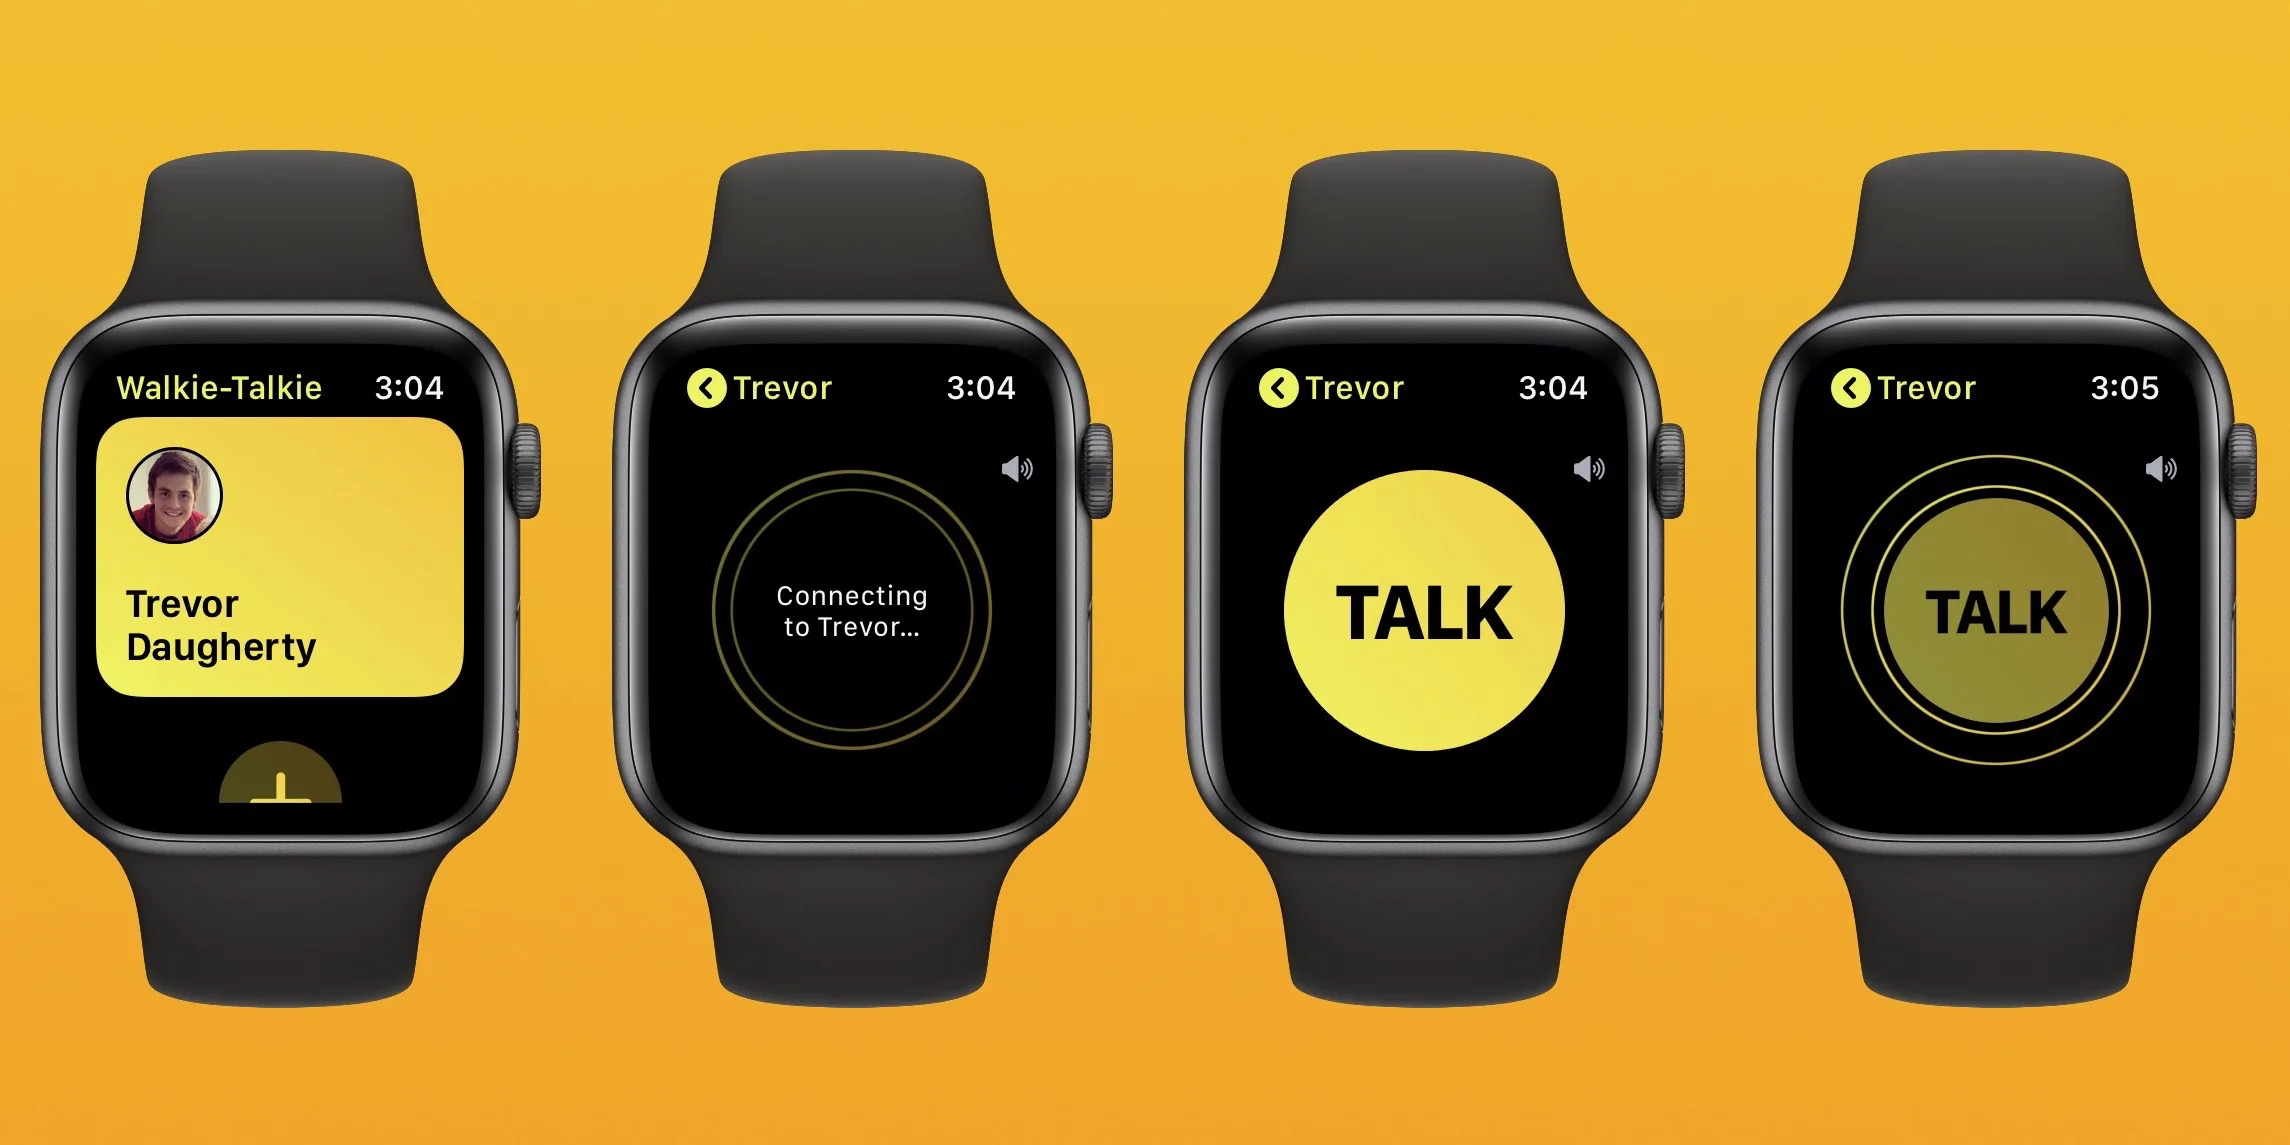 How to Use Your Apple Watch's Built-In Walkie Talkie?